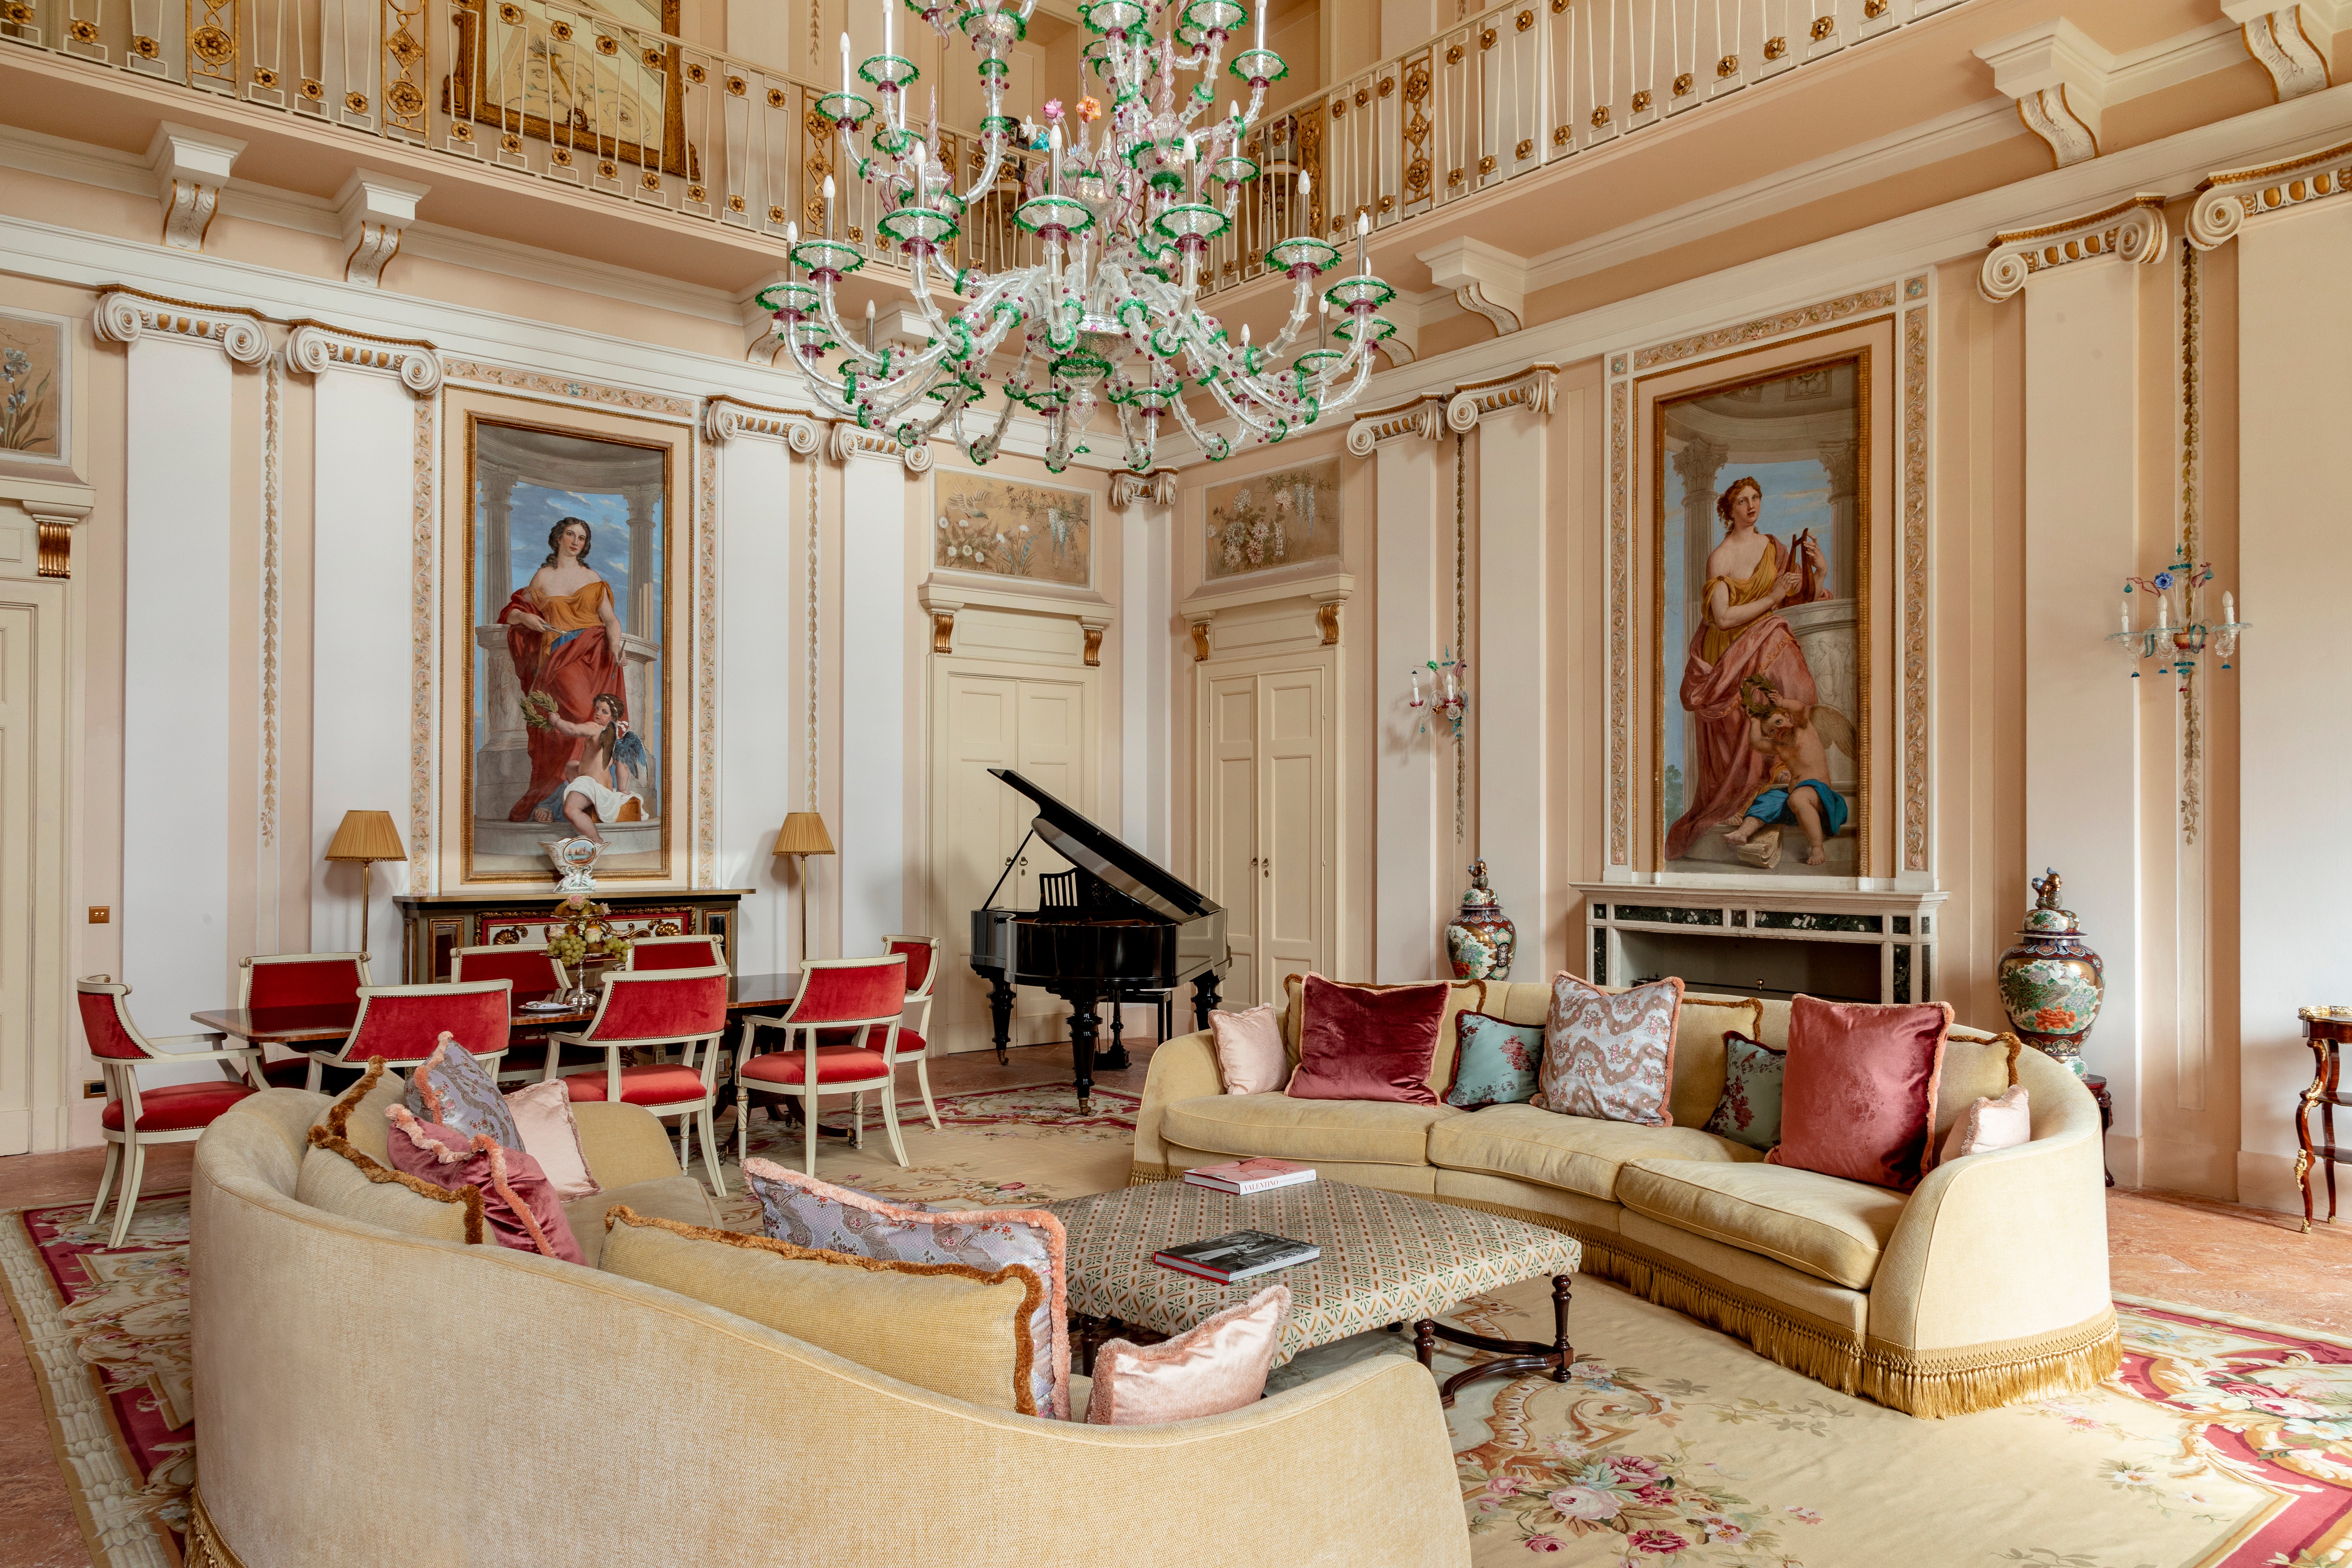 The former home of composer Vincenzo Bellini, this 18th-century mansion oozes la dolce vita vibes